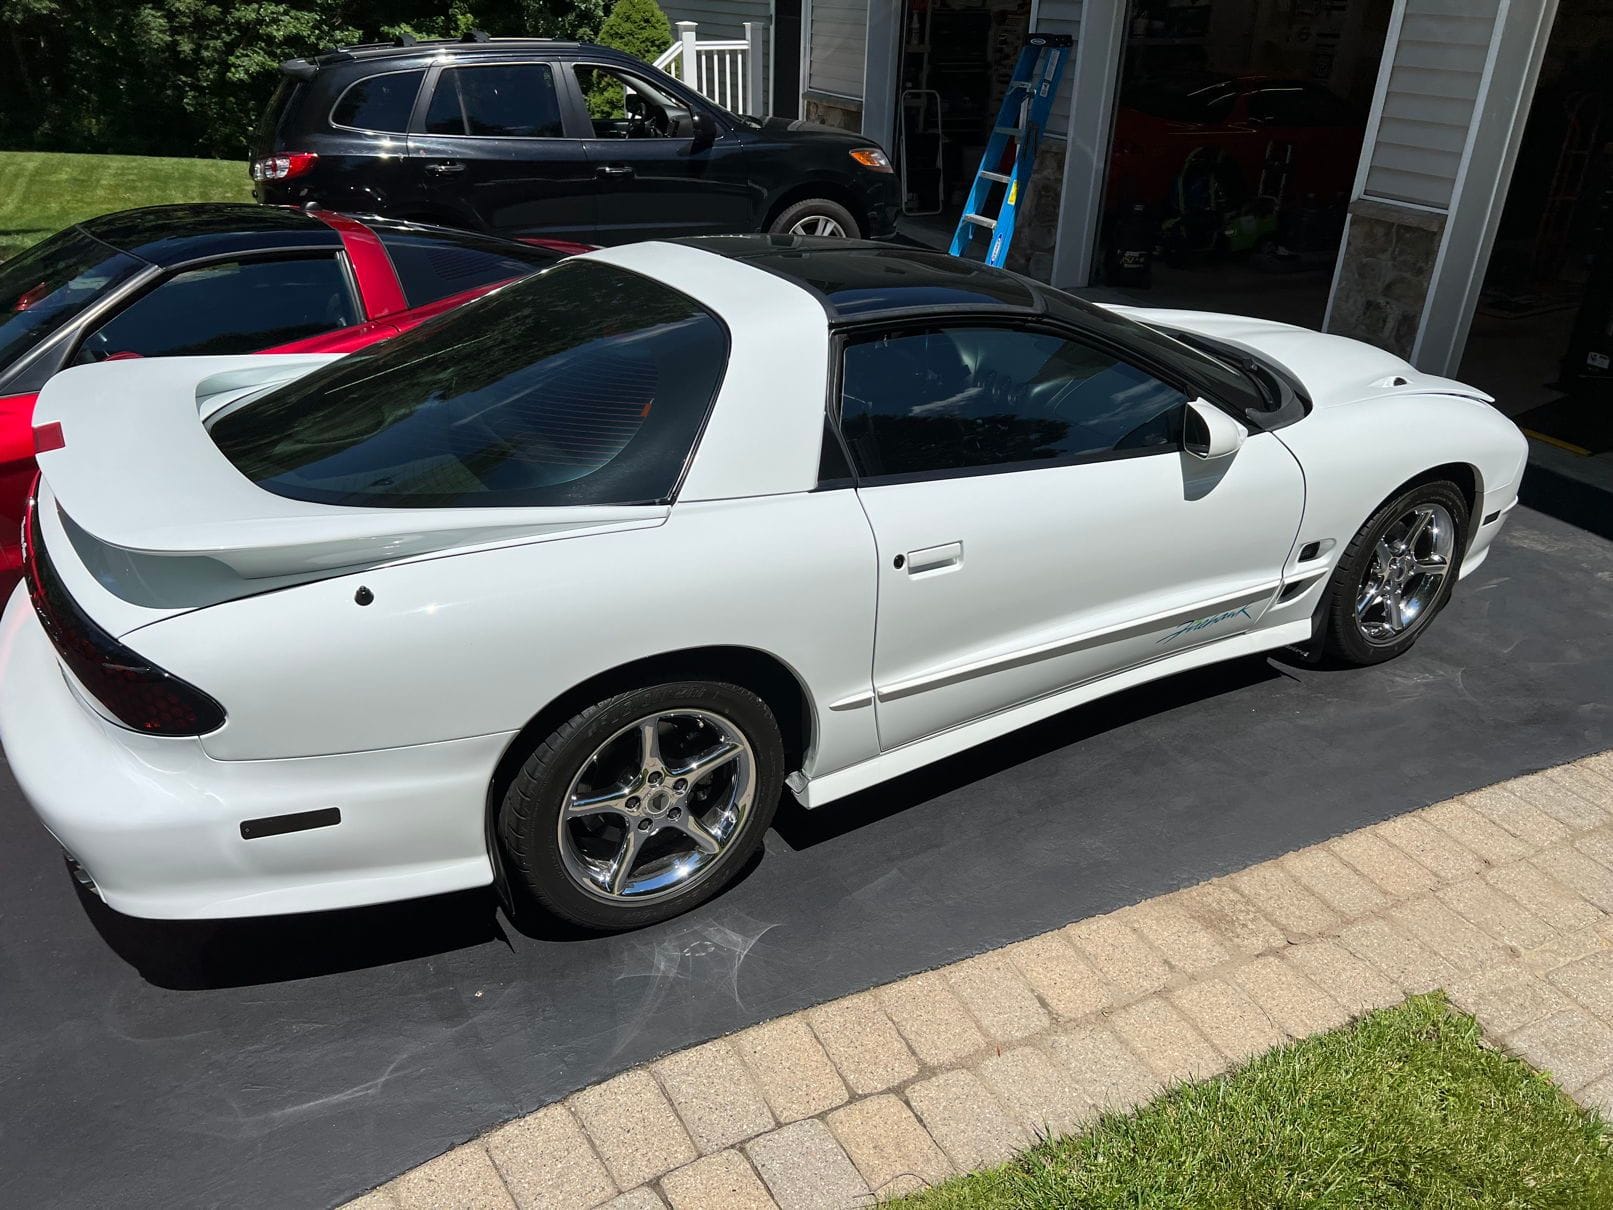 2001 Pontiac Firebird - FS: 2001 Firehawk #171 23K Miles White New Jersey - Used - VIN 2G2FV22G612124053 - 23,055 Miles - 8 cyl - 2WD - Automatic - Coupe - White - Hackettstown, NJ 07840, United States